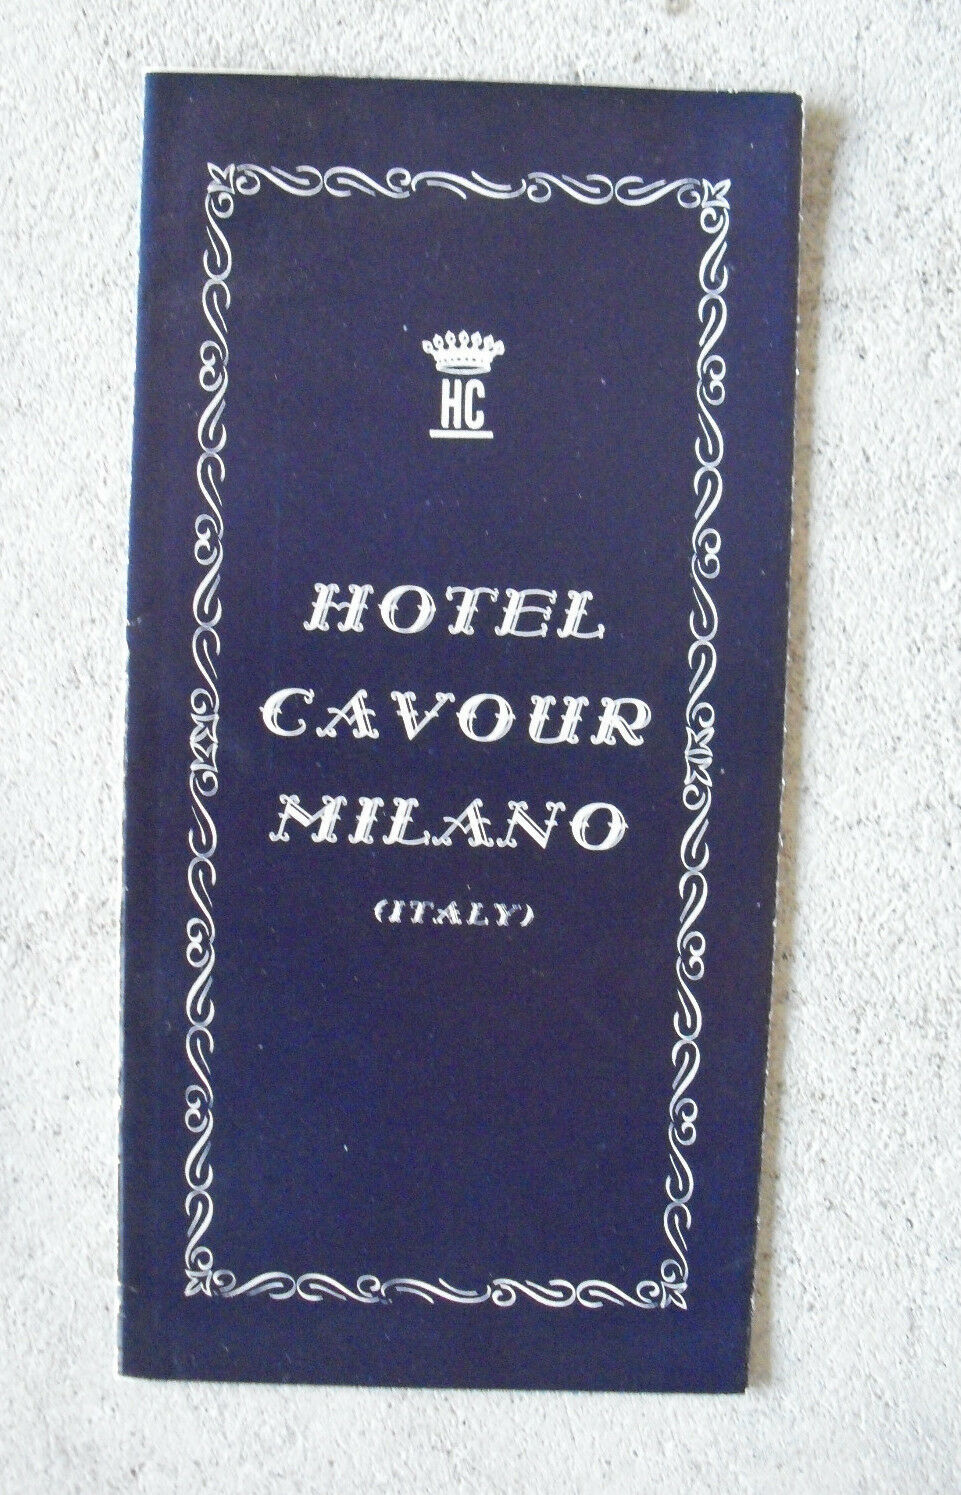 Primary image for Vintage 1960s Booklet Hotel Cavour Milano Italy